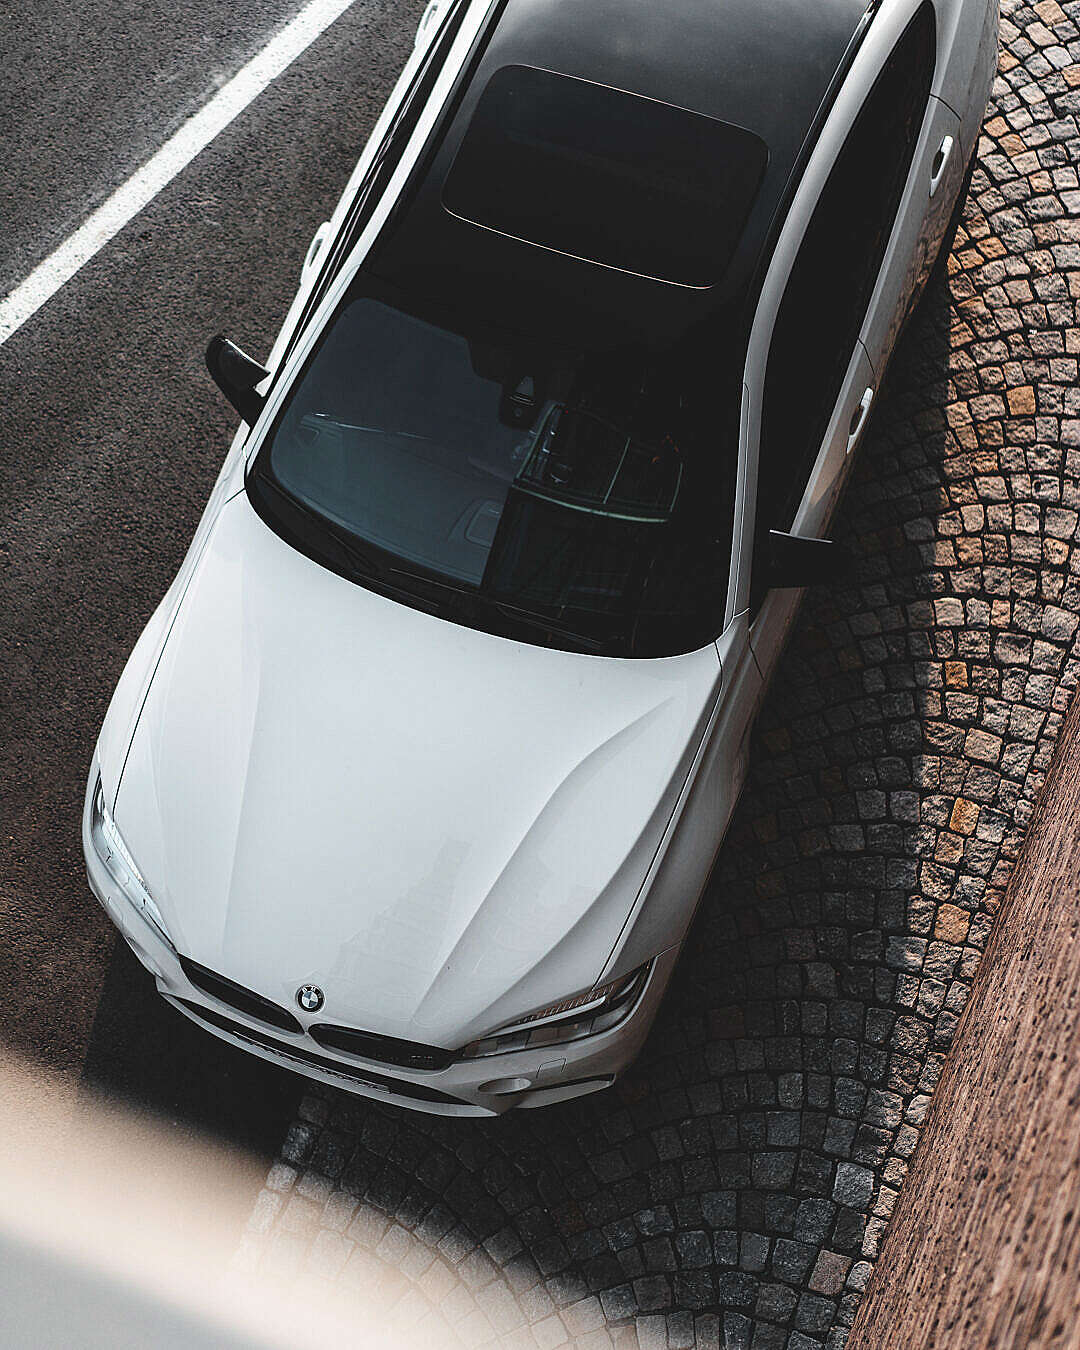 Download White Car Top View FREE Stock Photo